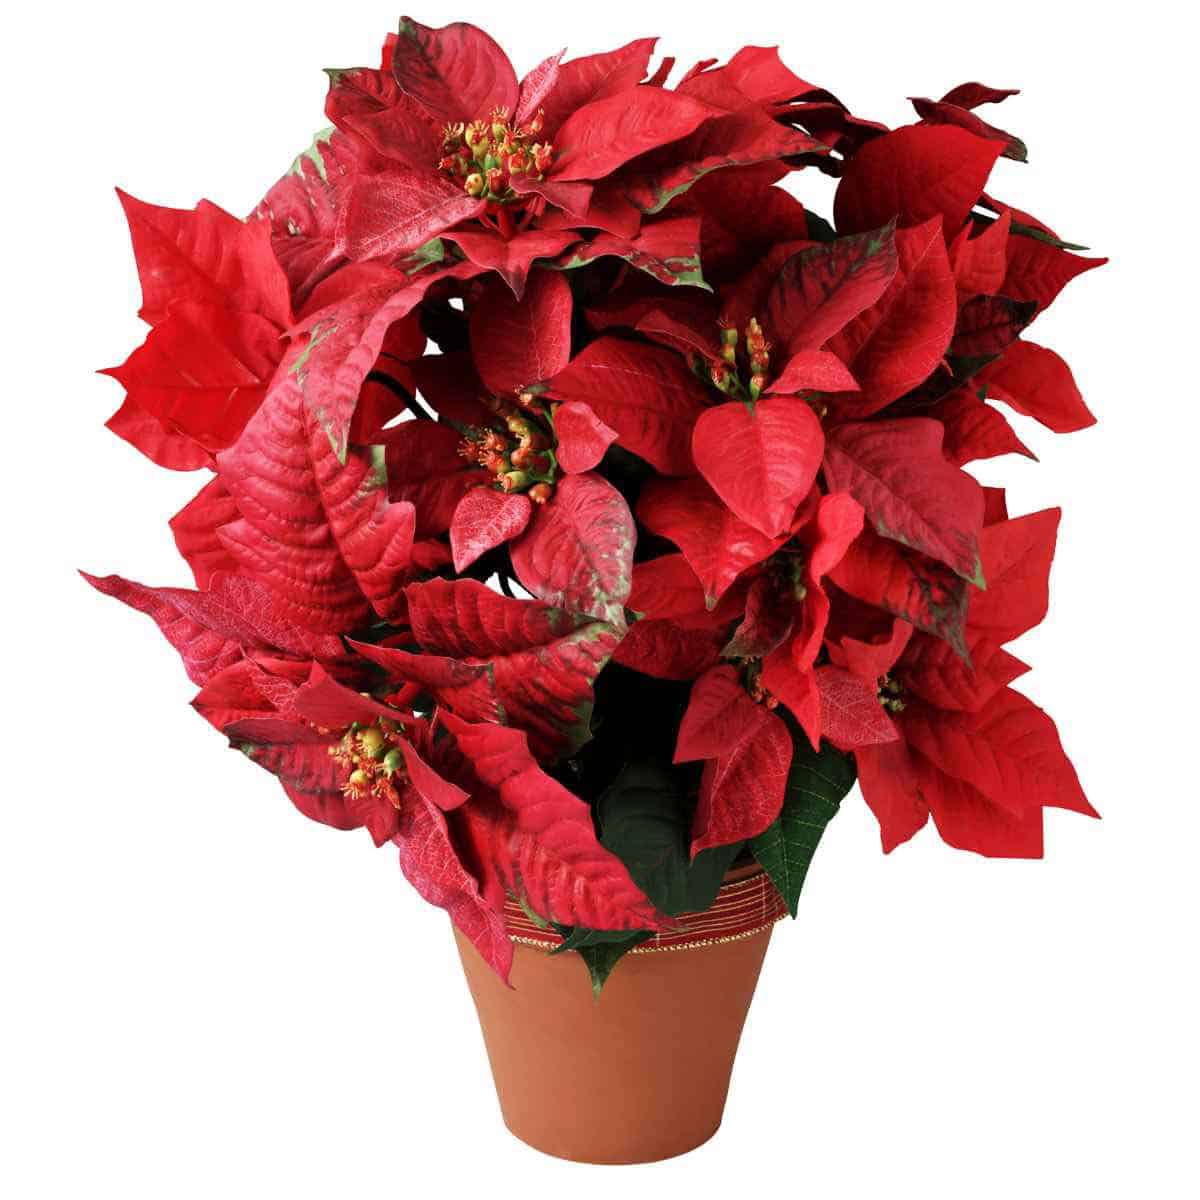 A poinsettia plant in a pot, with slightly drooping leaves.